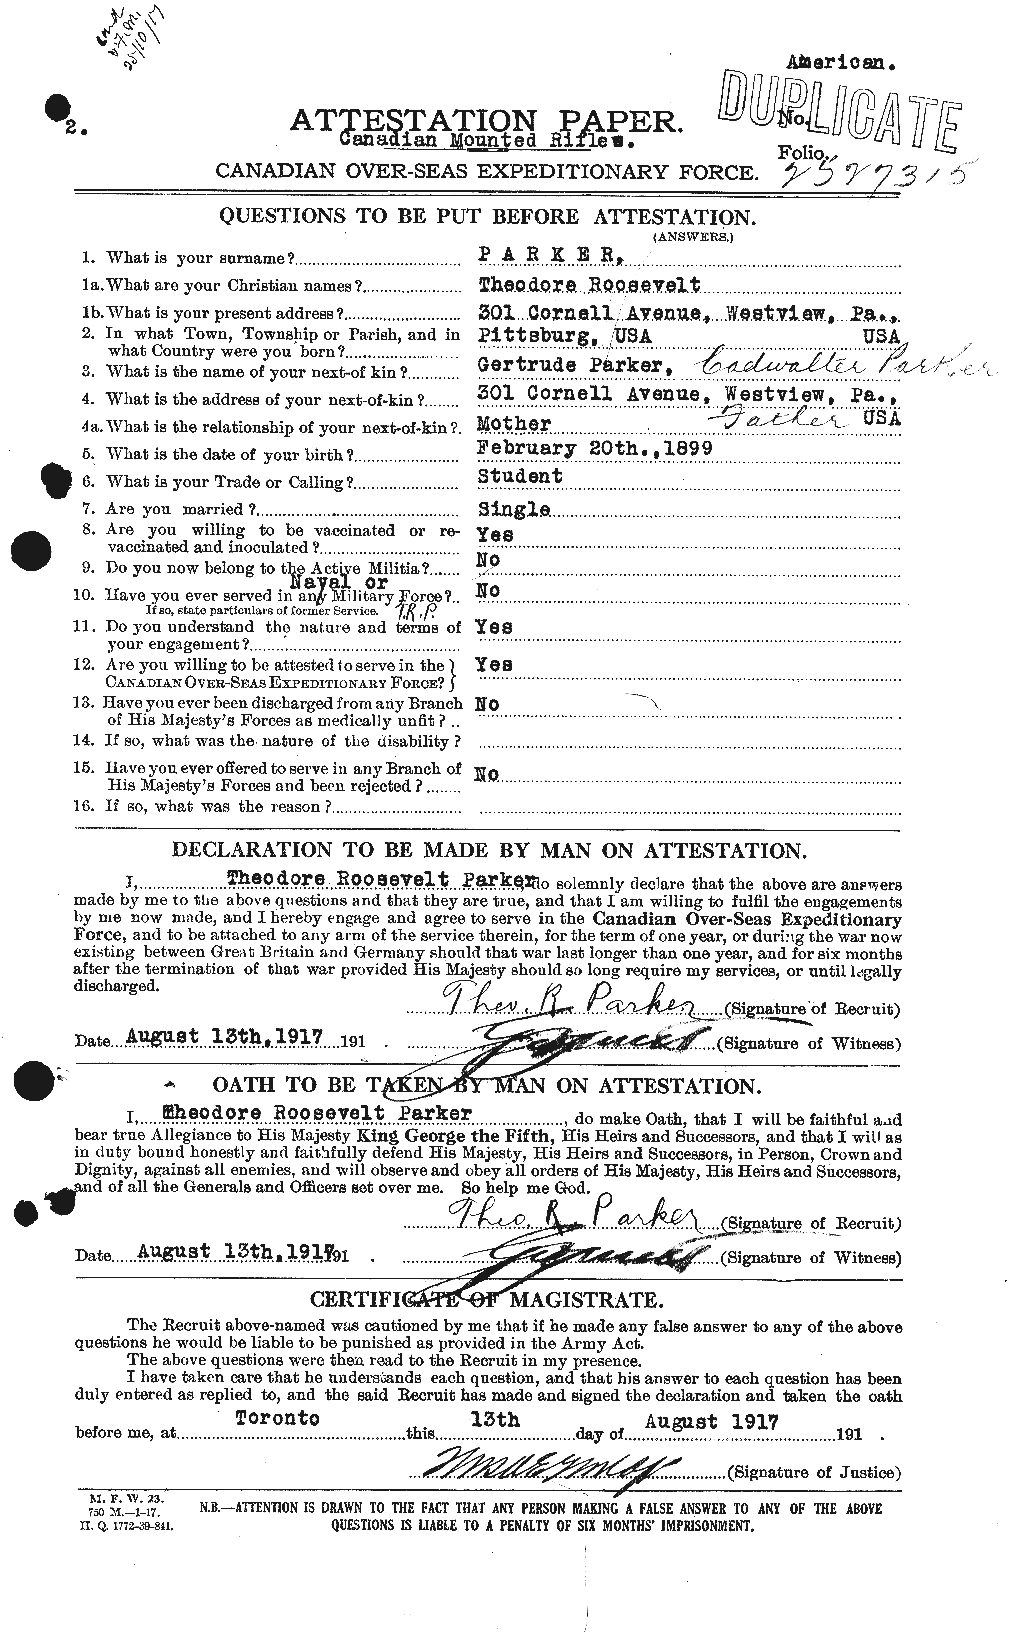 Personnel Records of the First World War - CEF 565652a